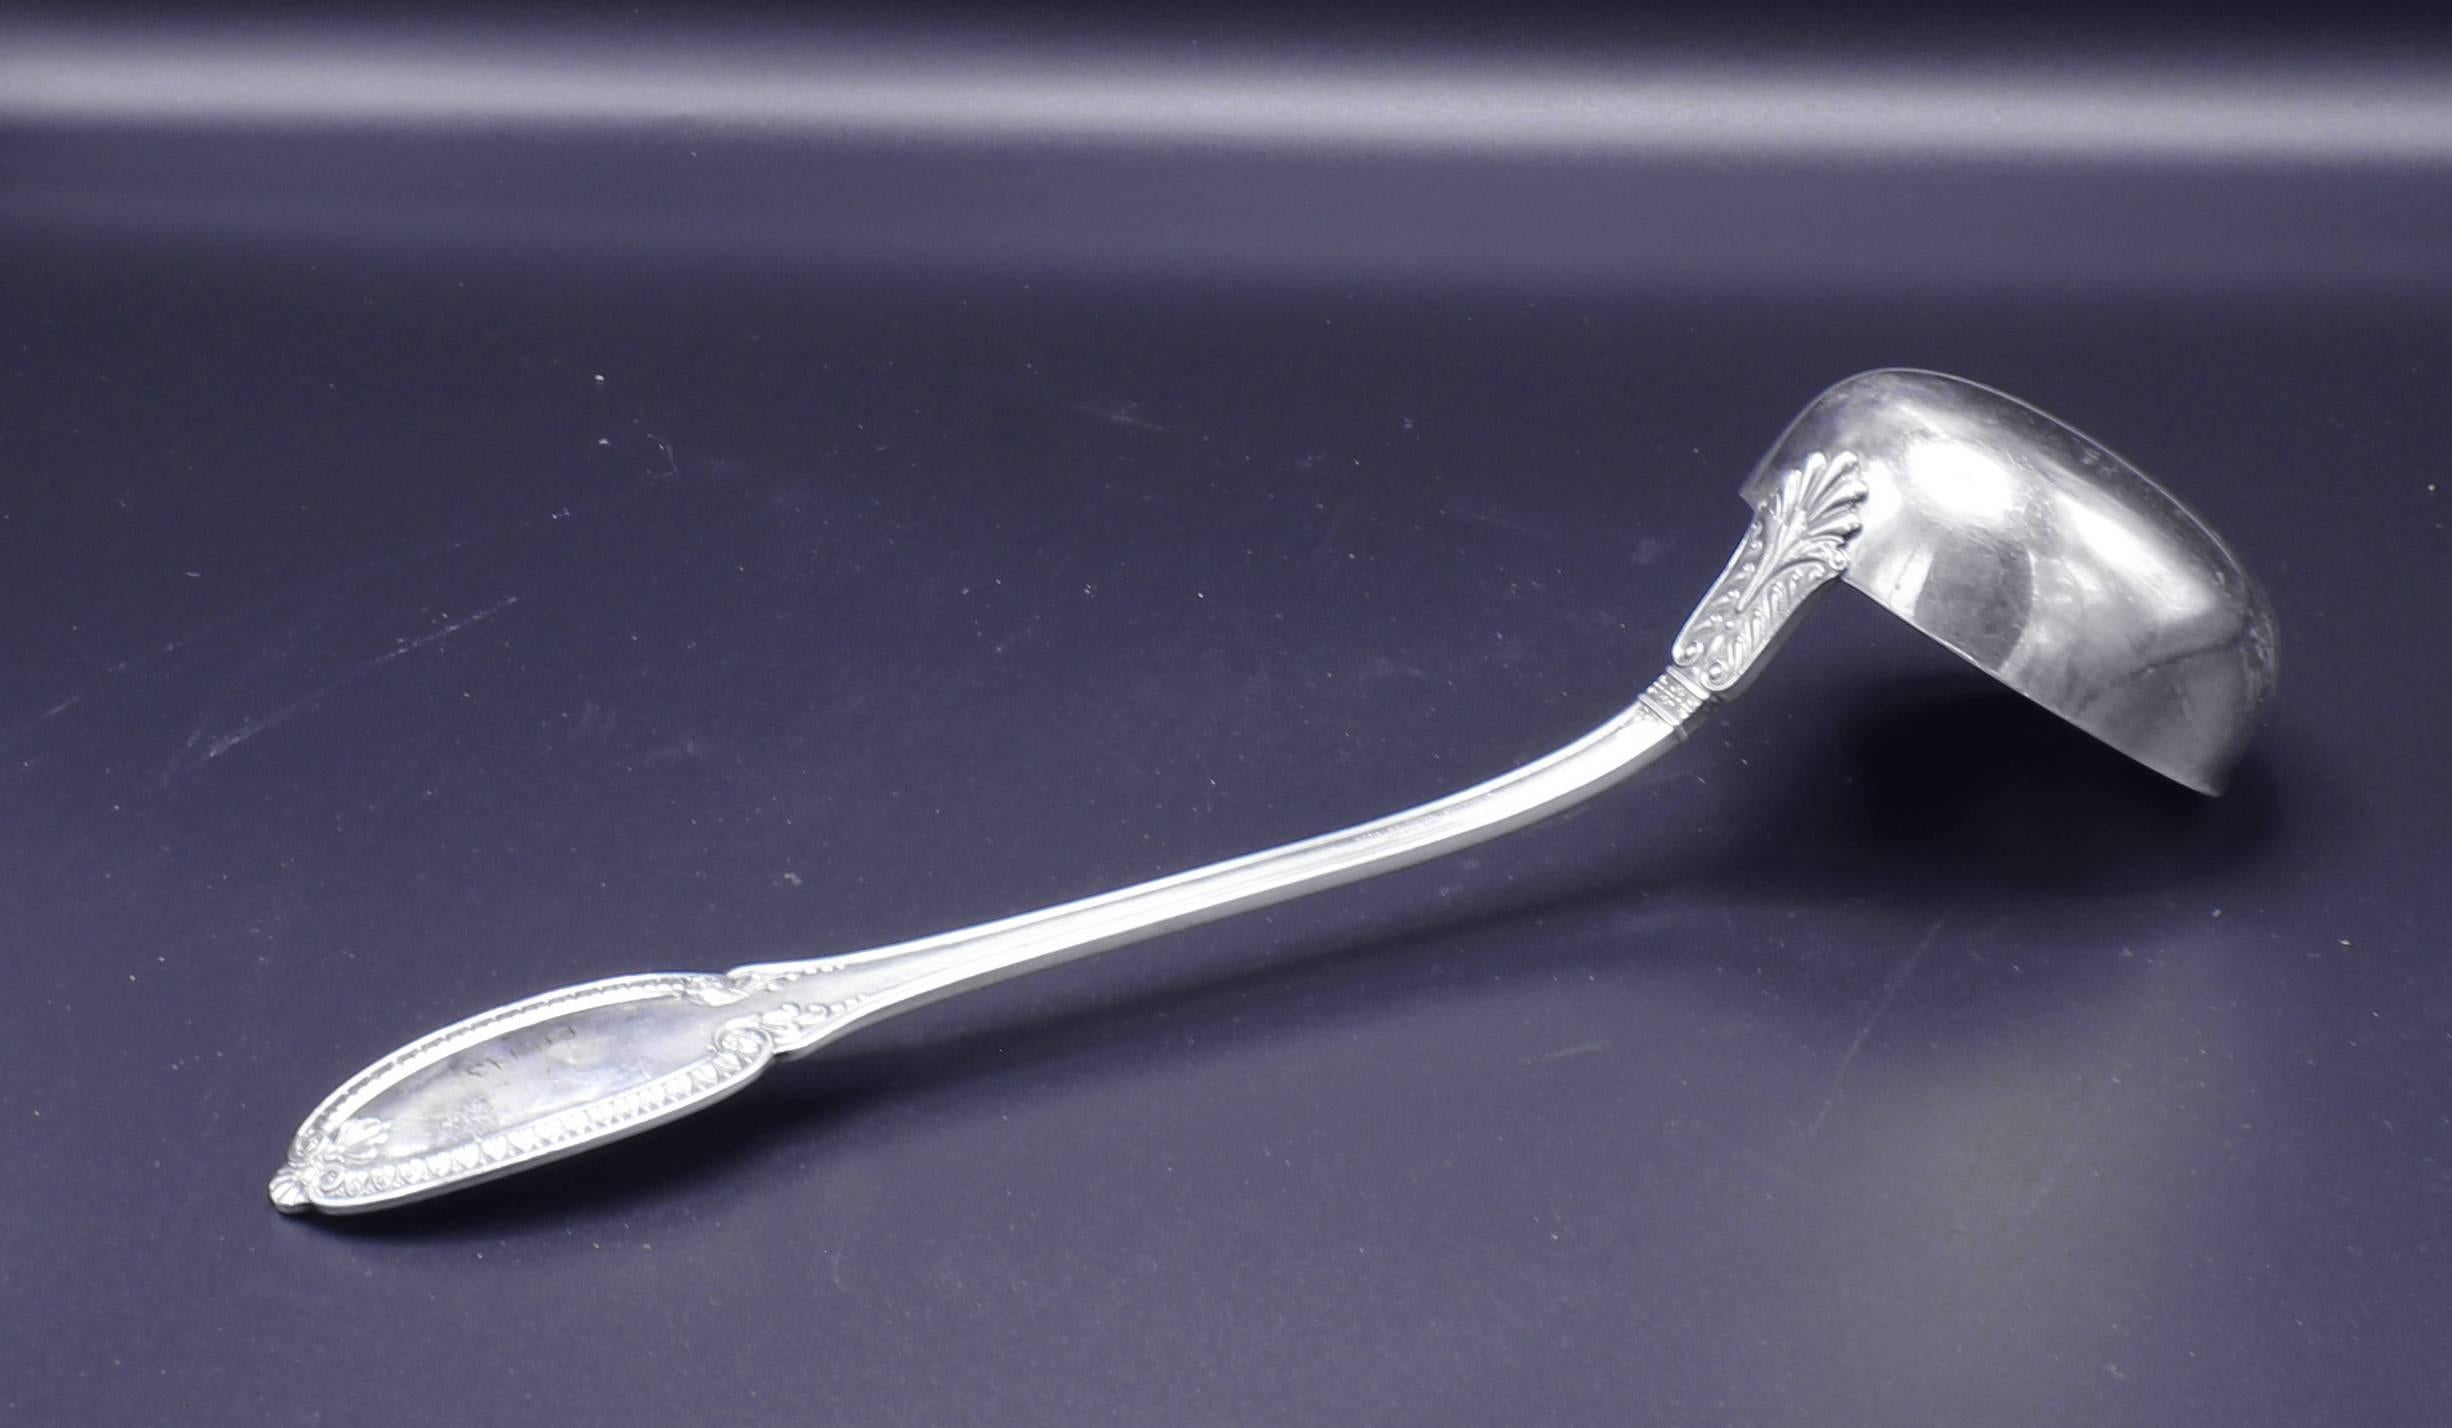 From famed Italian silversmiths Buccellati, a large silver ladle from thier Empire collection.  13 inches long,  310 grams